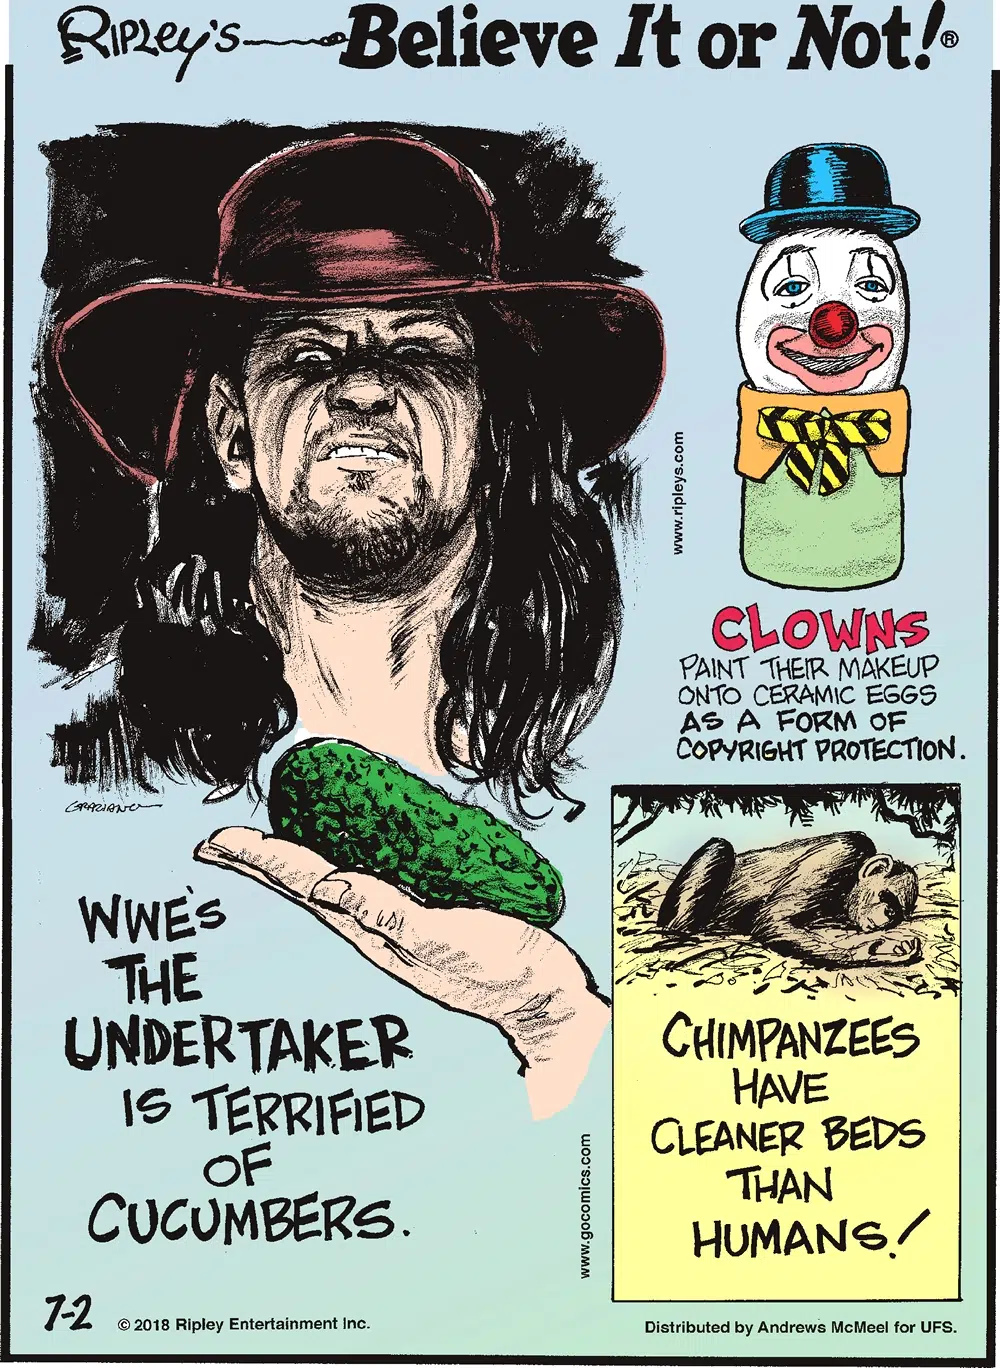 WWE's The Undertaker is terrified of cucumbers.-------------------- Clowns paint their makeup onto ceramic eggs as a form of copyright protection.-------------------- Chimpanzees have cleaner beds than humans!